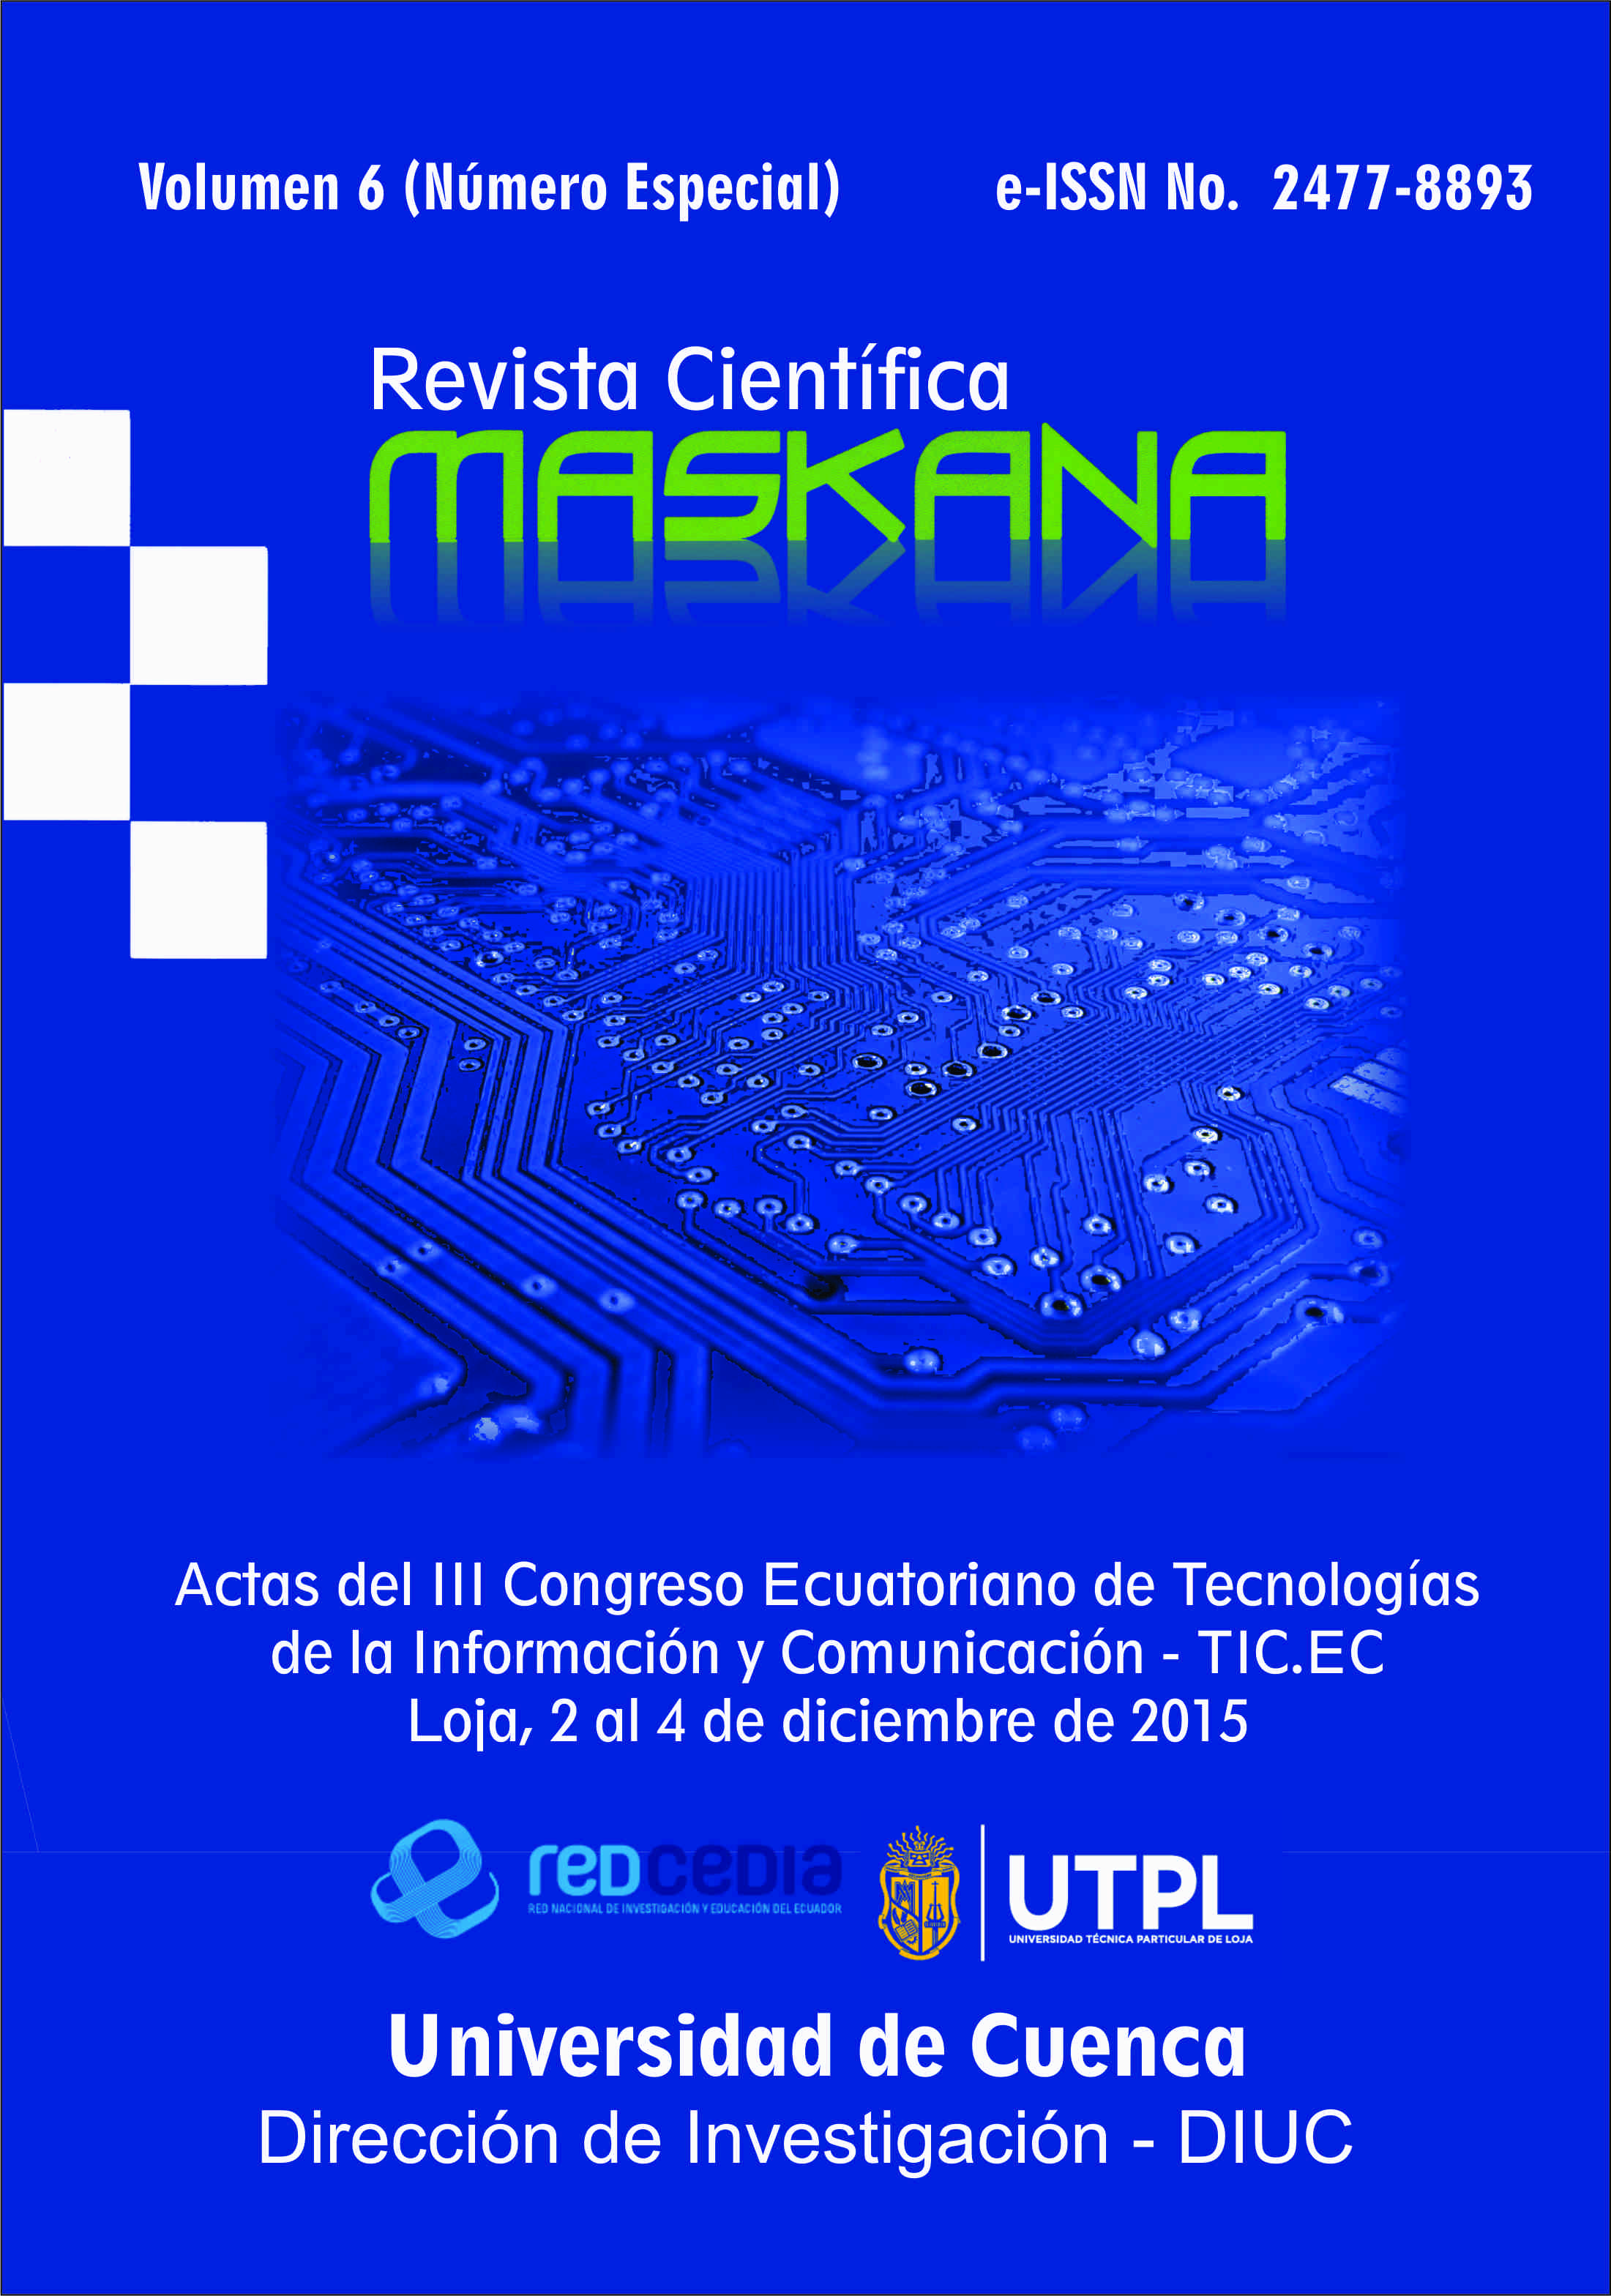 					View Vol. 6 (2015): Proceedings of the 3rd. Ecuadorian Congress of Information and Communication Technologies - TIC.EC 2015
				